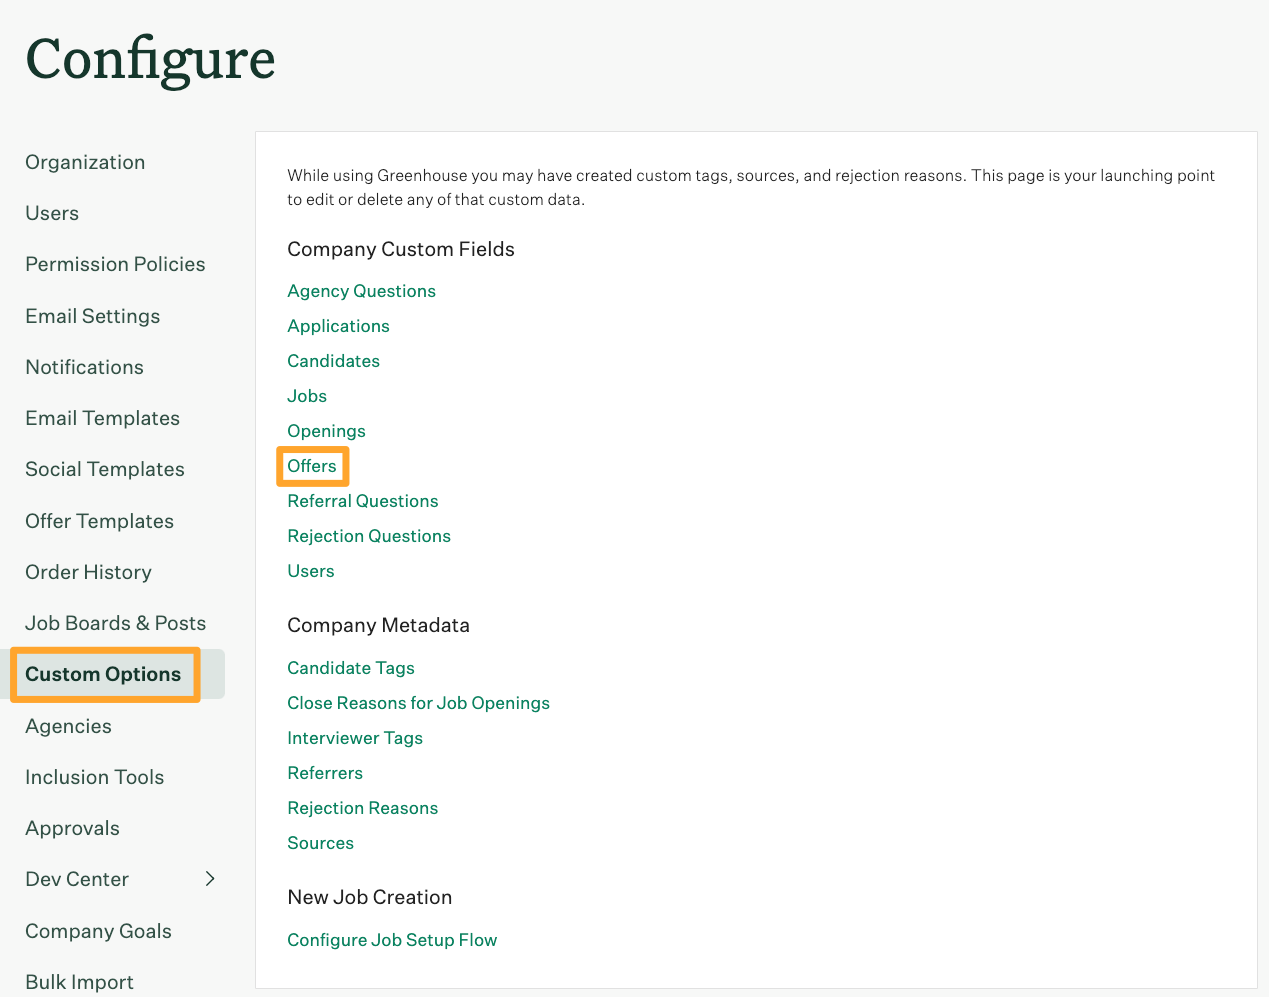 Configure_page_with_orange_boxes_around_the_Custom_options_and_Offers_buttons.png